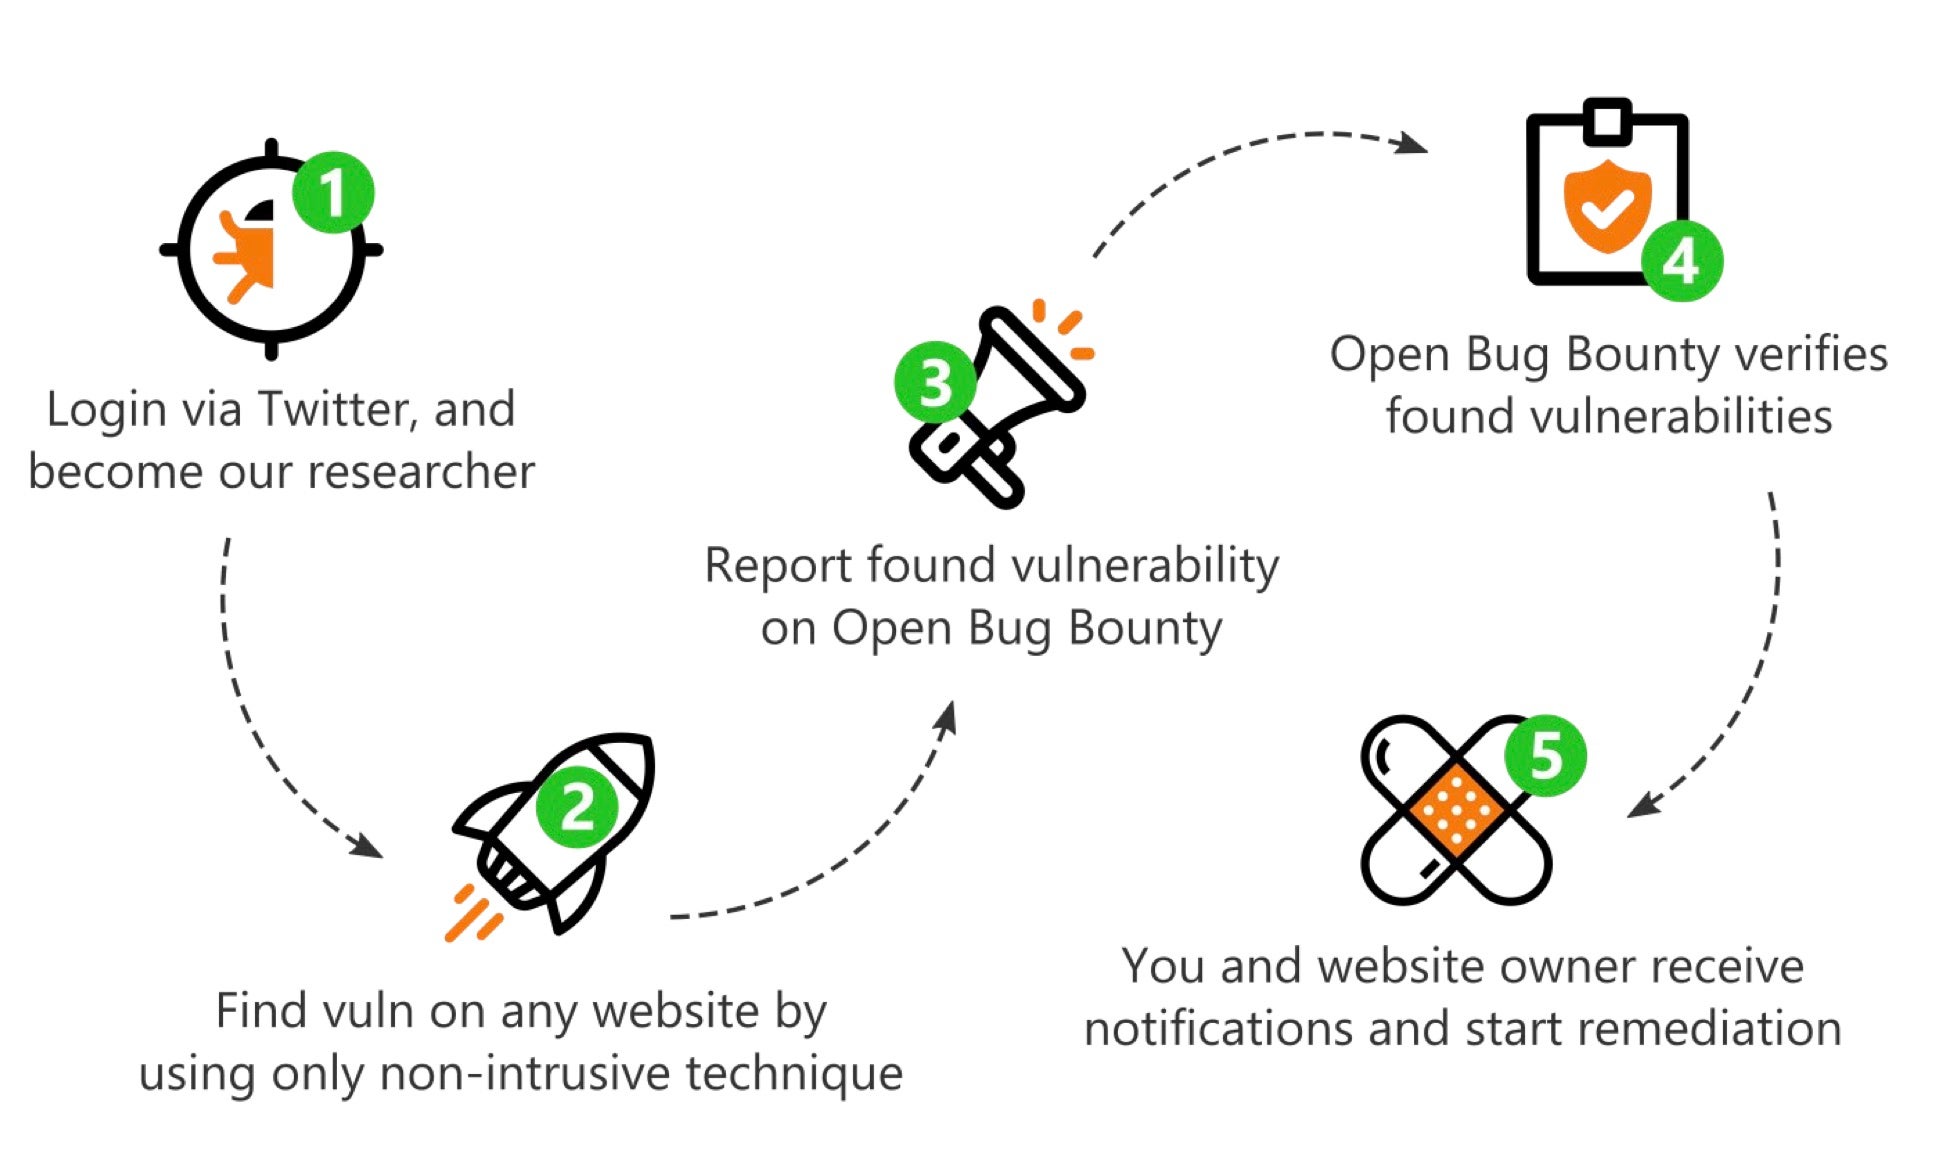 image showing how to get involved in open bug bounty